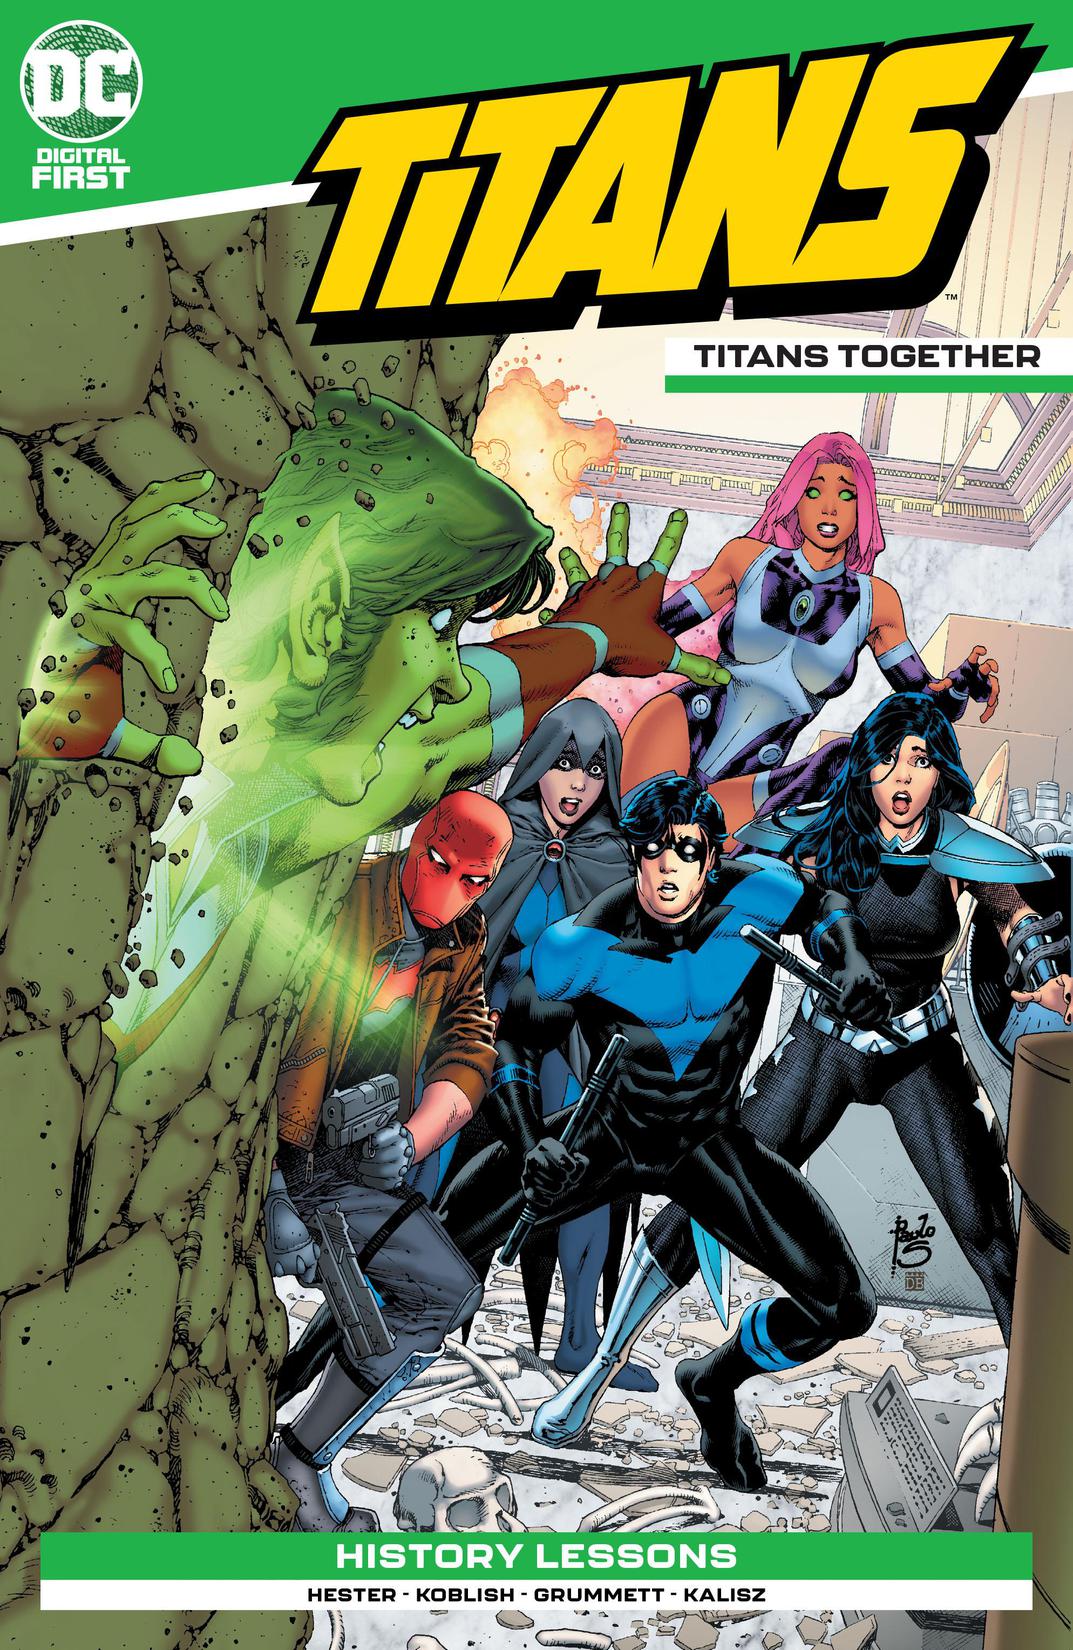 Titans: Titans Together #1 preview images